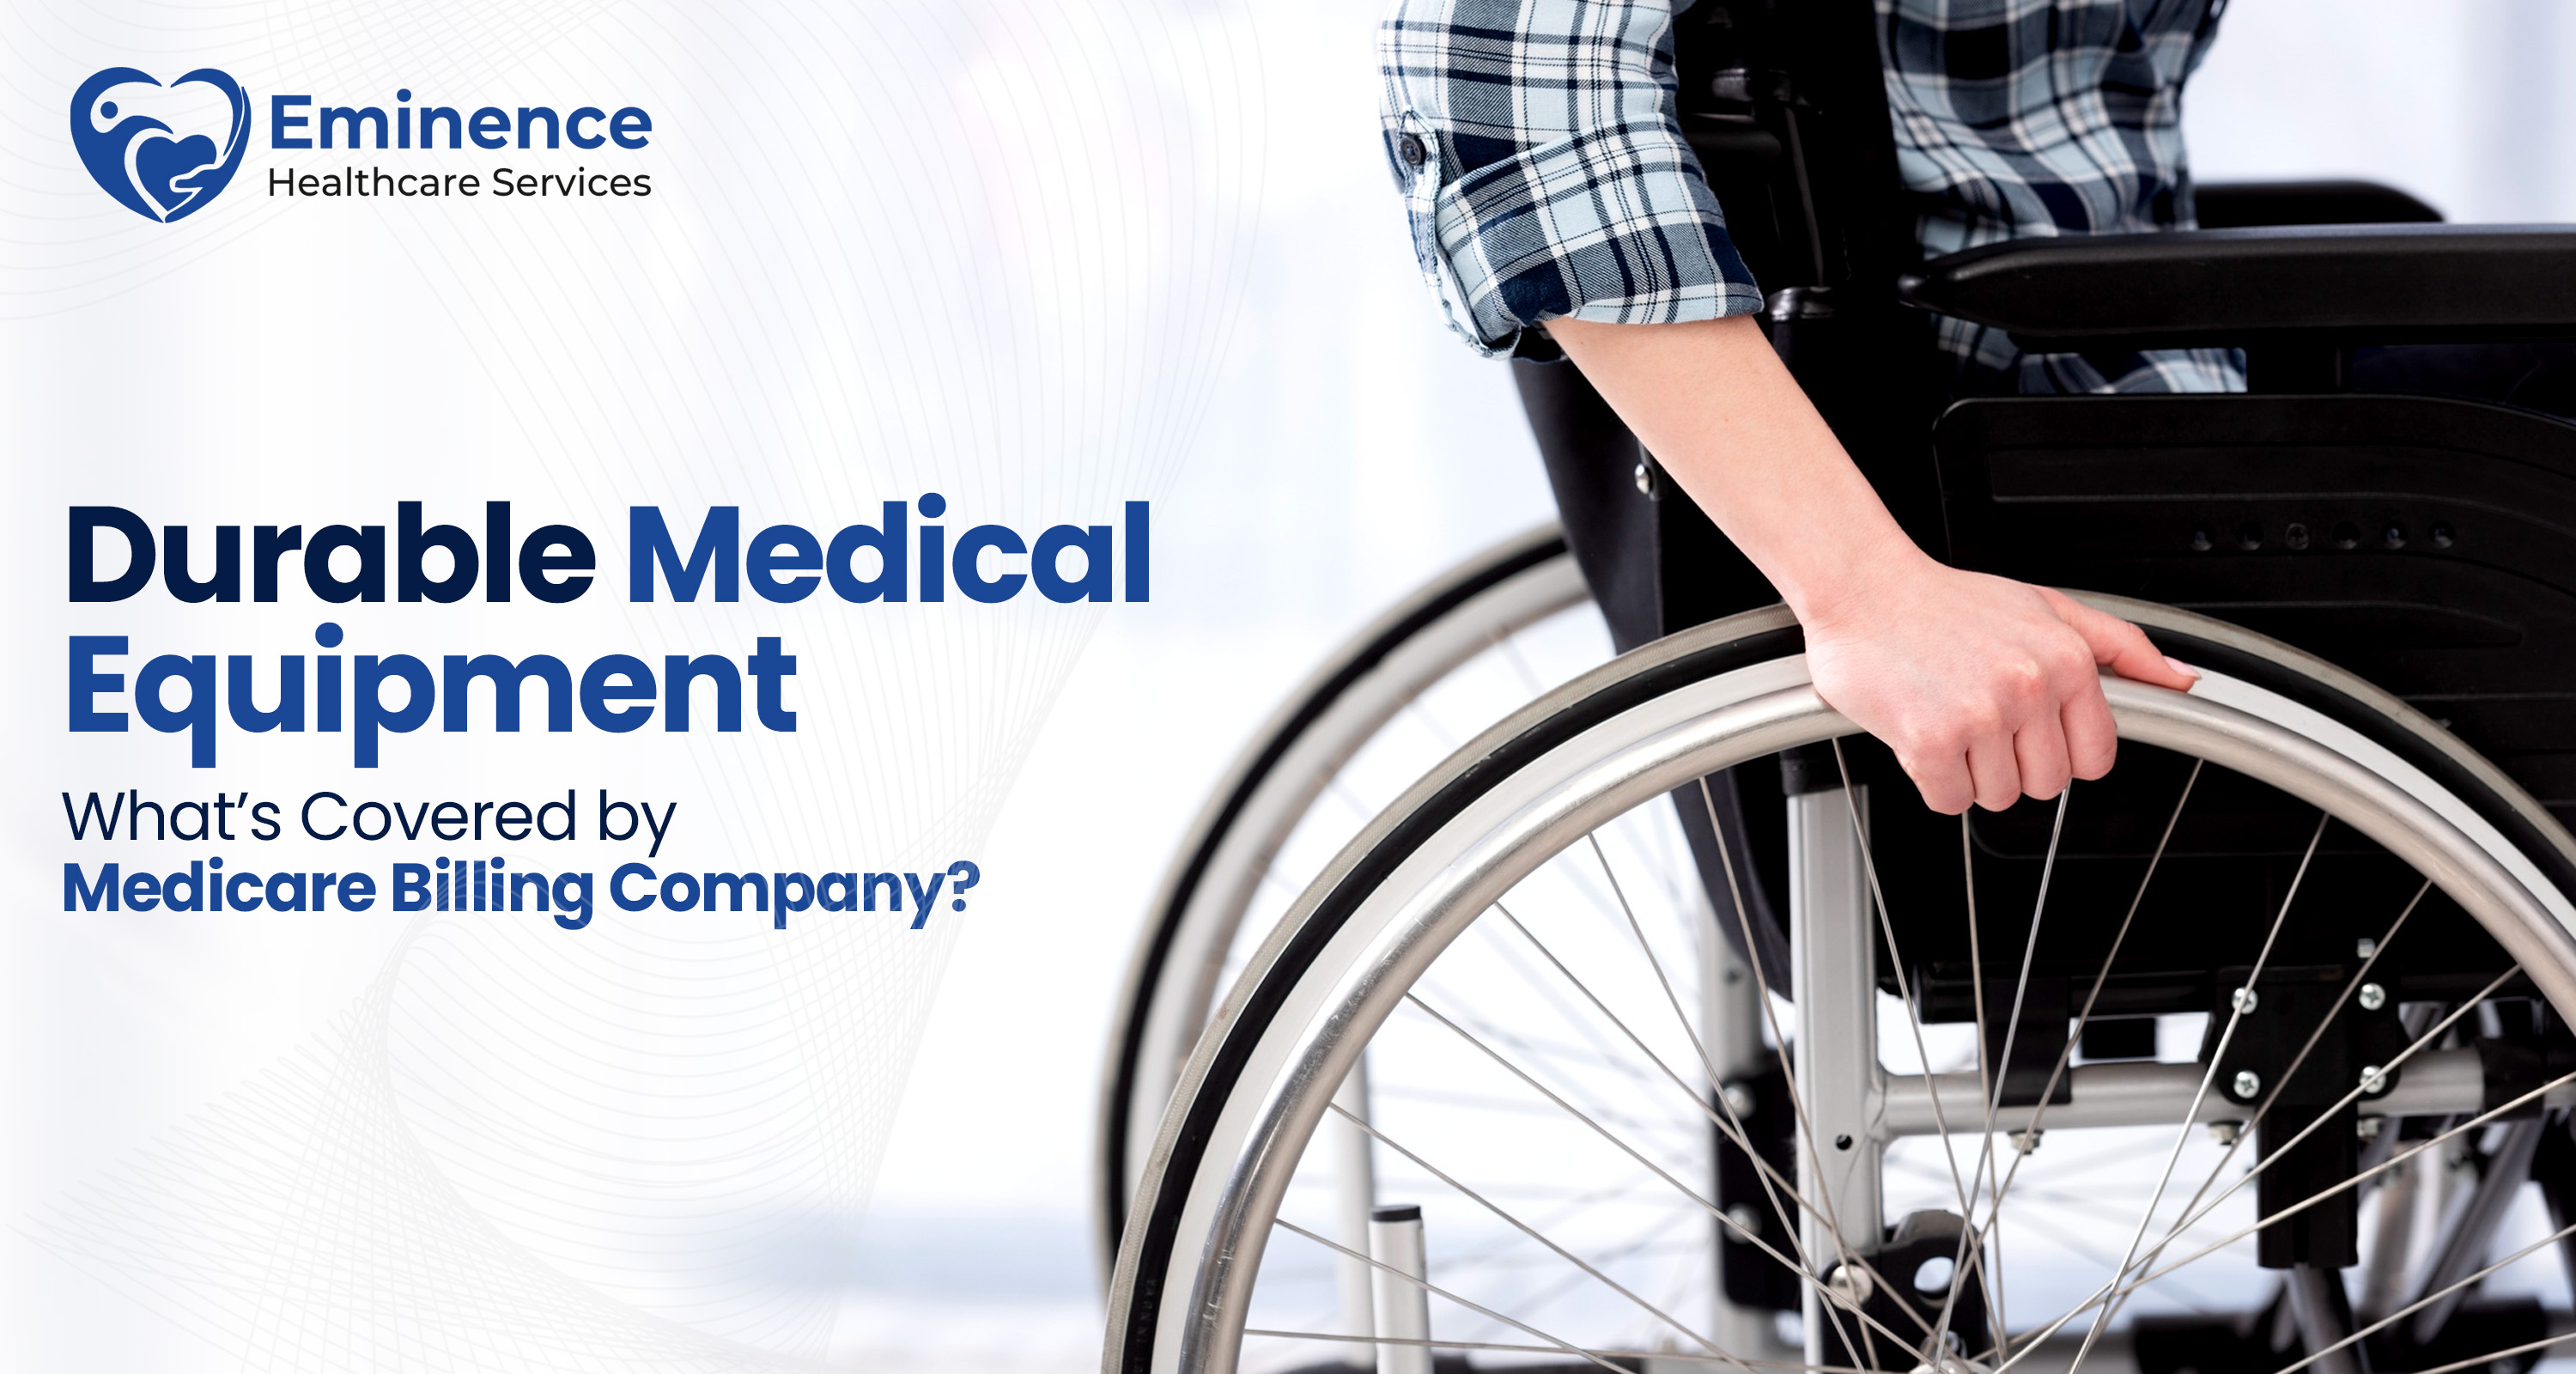 Durable Medical Equipment: What’s Covered by Medicare Billing Company?